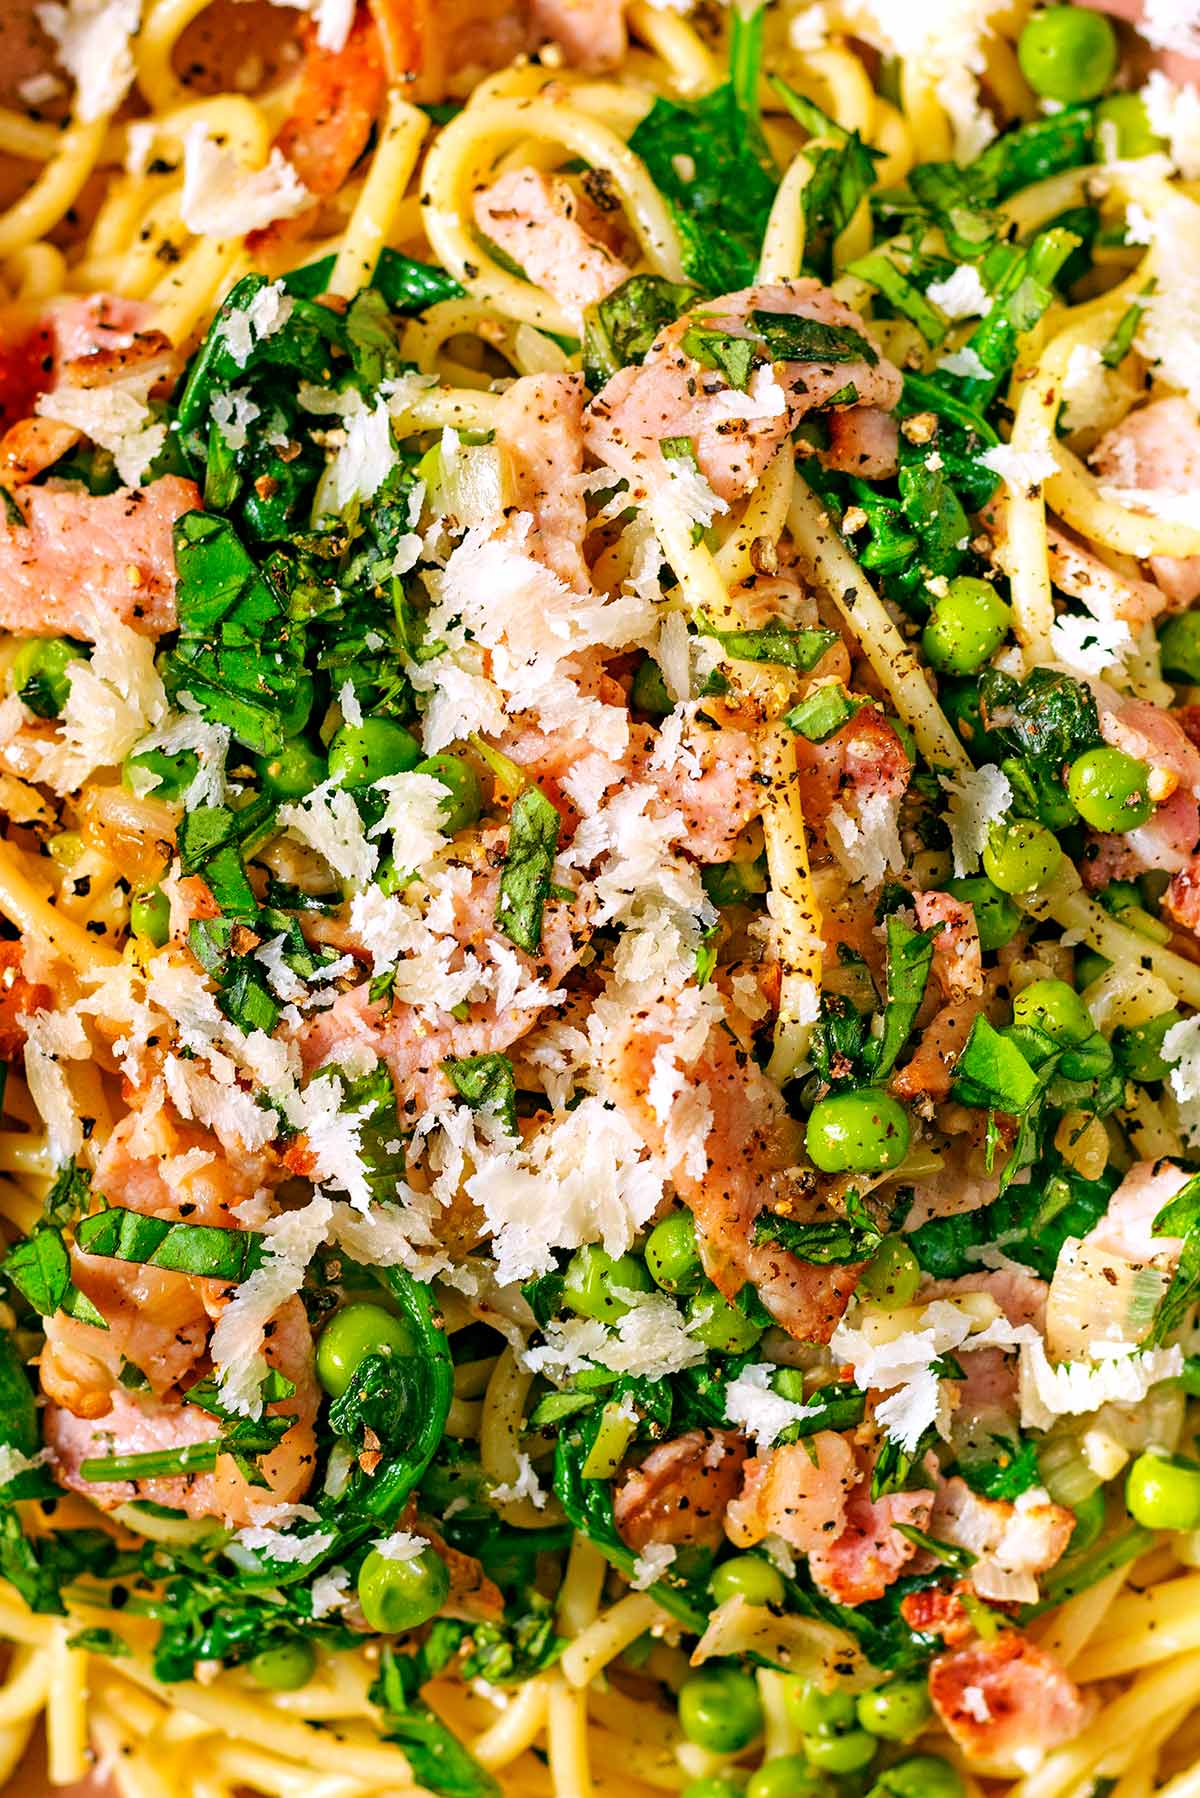 Bacon, peas and spinach mixed into cooked spaghetti with herbs and Parmesan shavings on top.